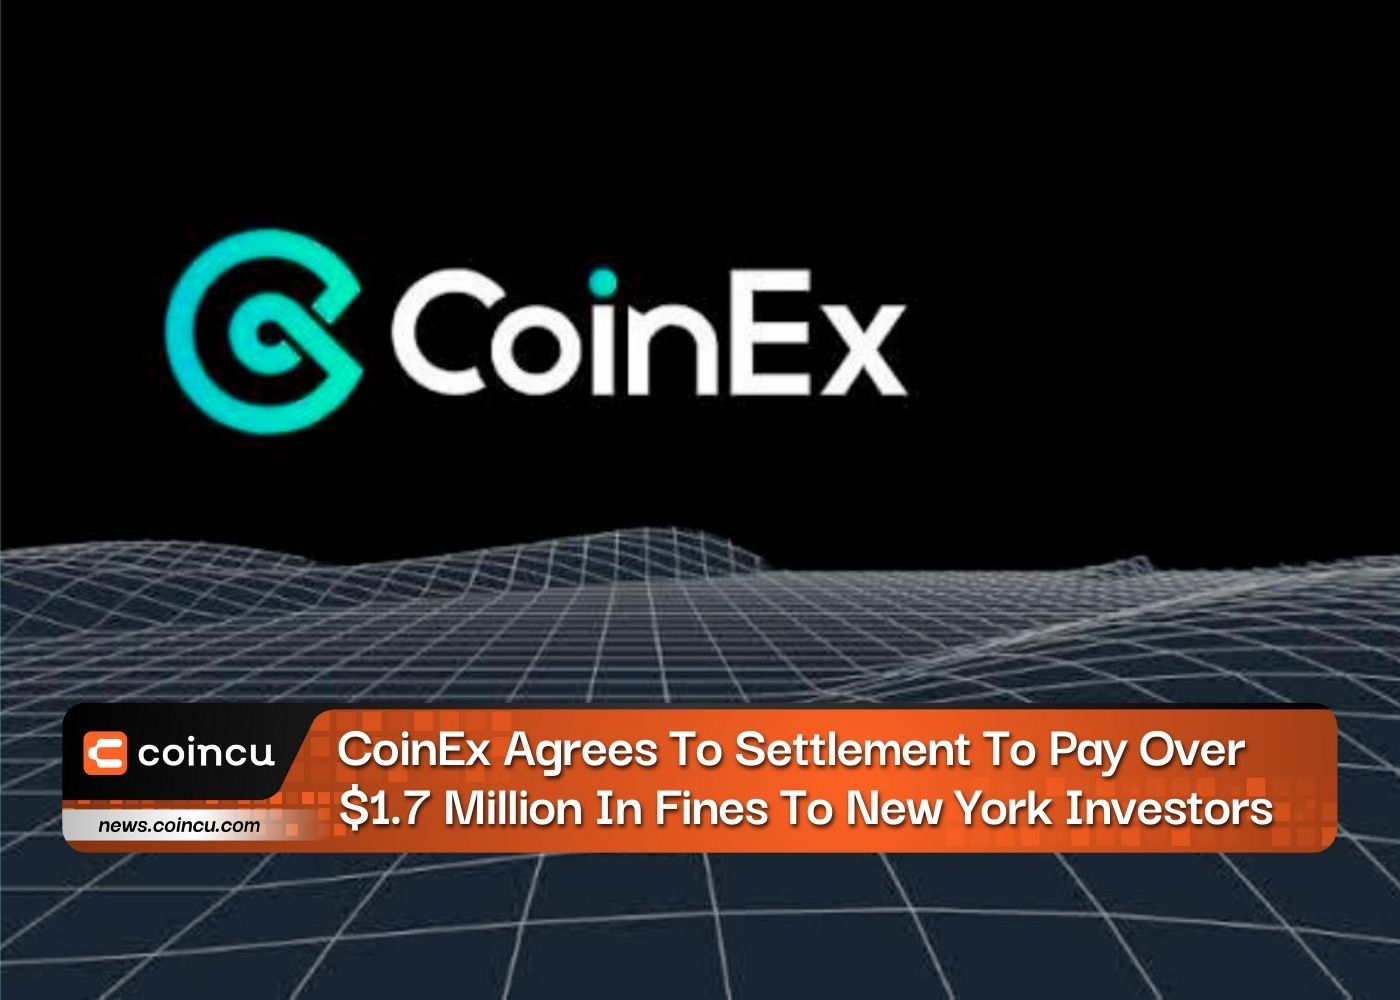 CoinEx Agrees To Settlement To Pay Over $1.7 Million In Fines To New York Investors